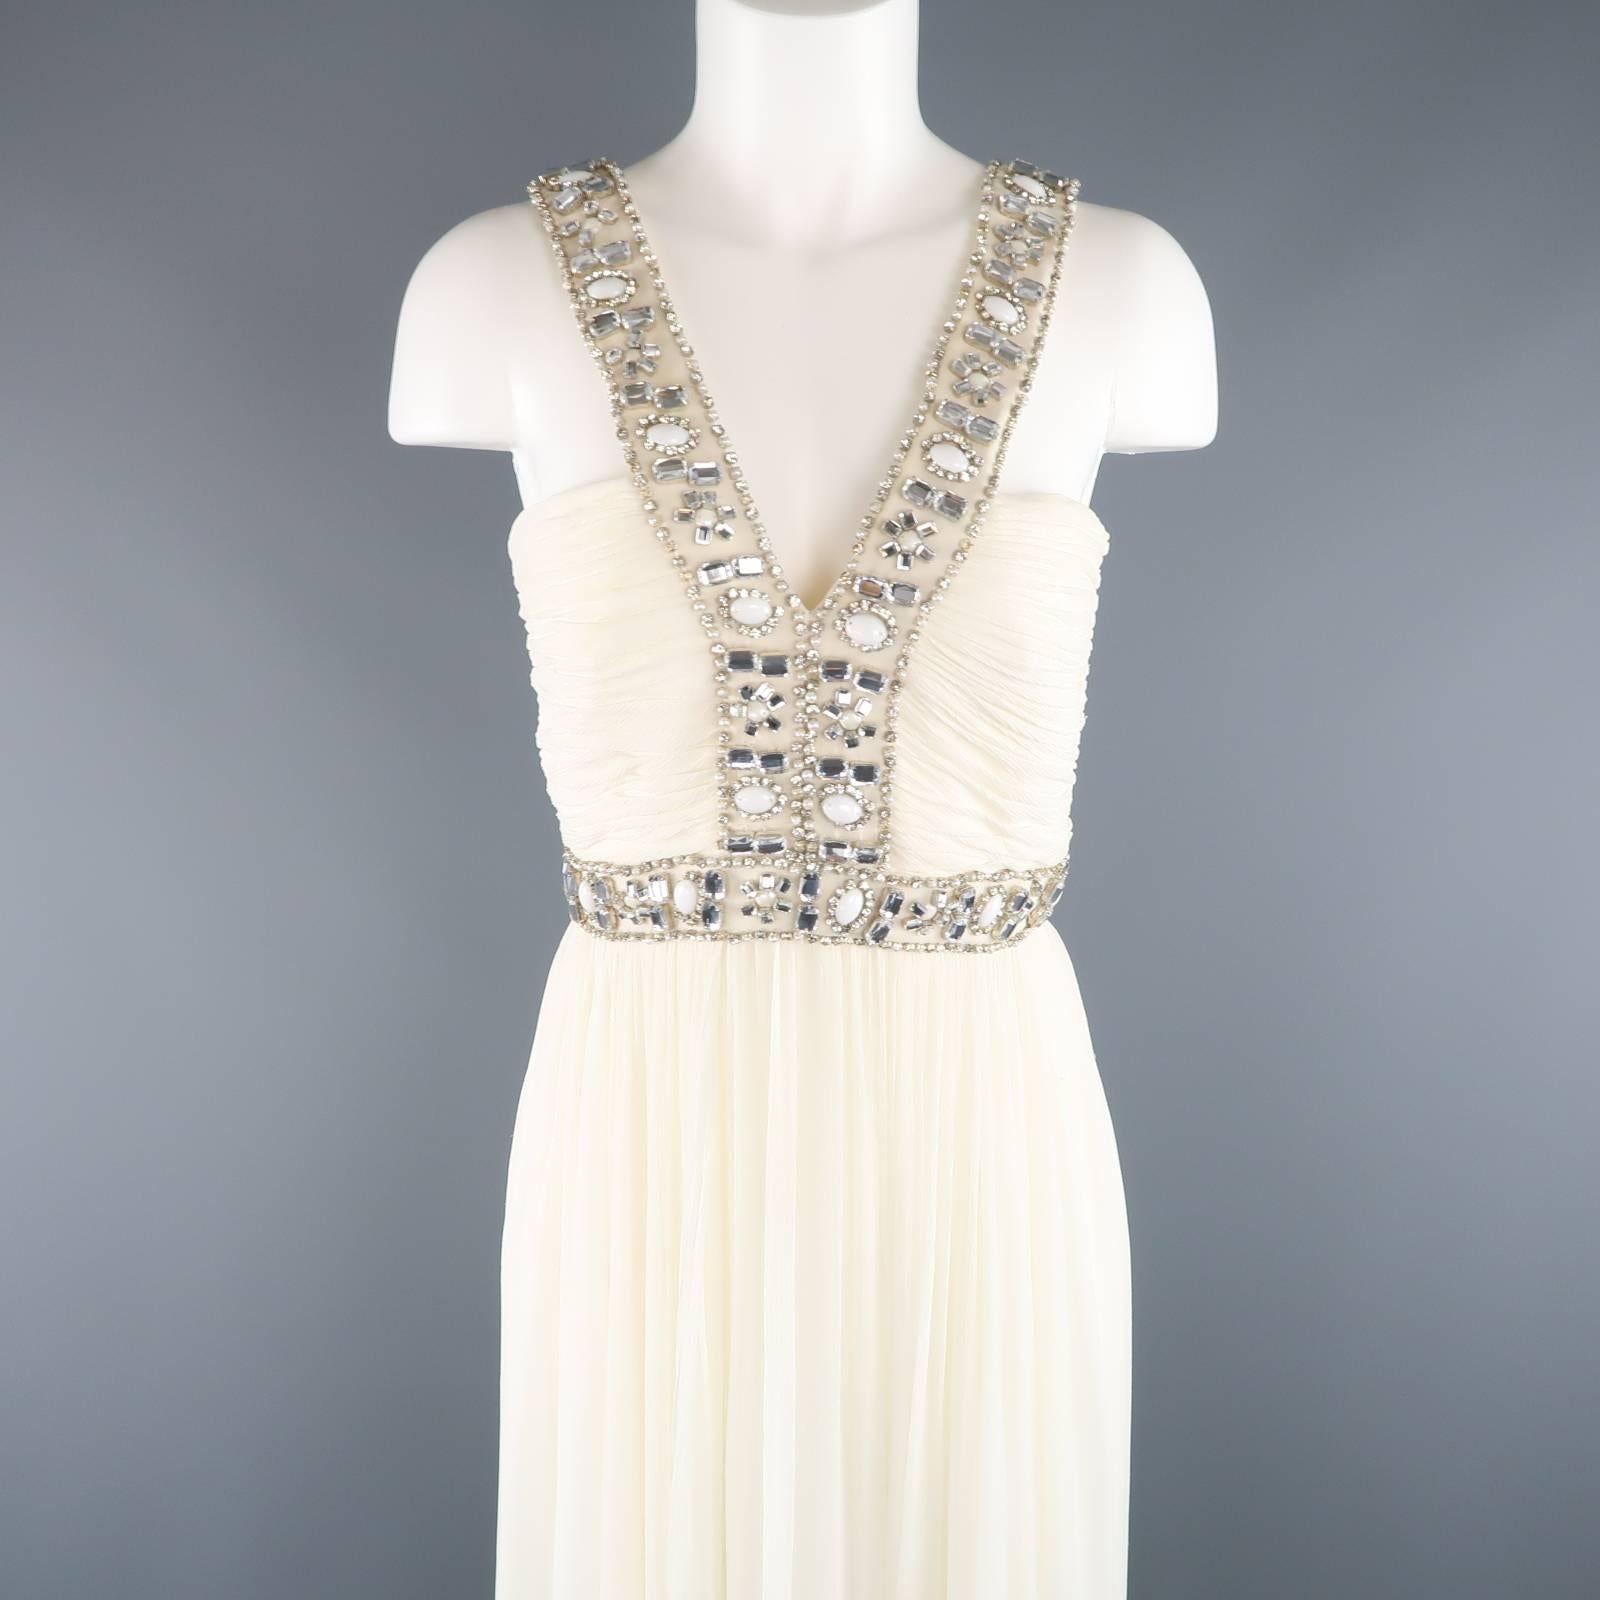 Gorgeous NAEEM KHAN evening gown comes in cream silk crepe chiffon and features a pleated bodice with rhinestone beaded straps and gathered skirt with overlay panel. Wear throughout. 
 
Good Pre-Owned Condition.
Marked: (no tags)
 
Measurements:
